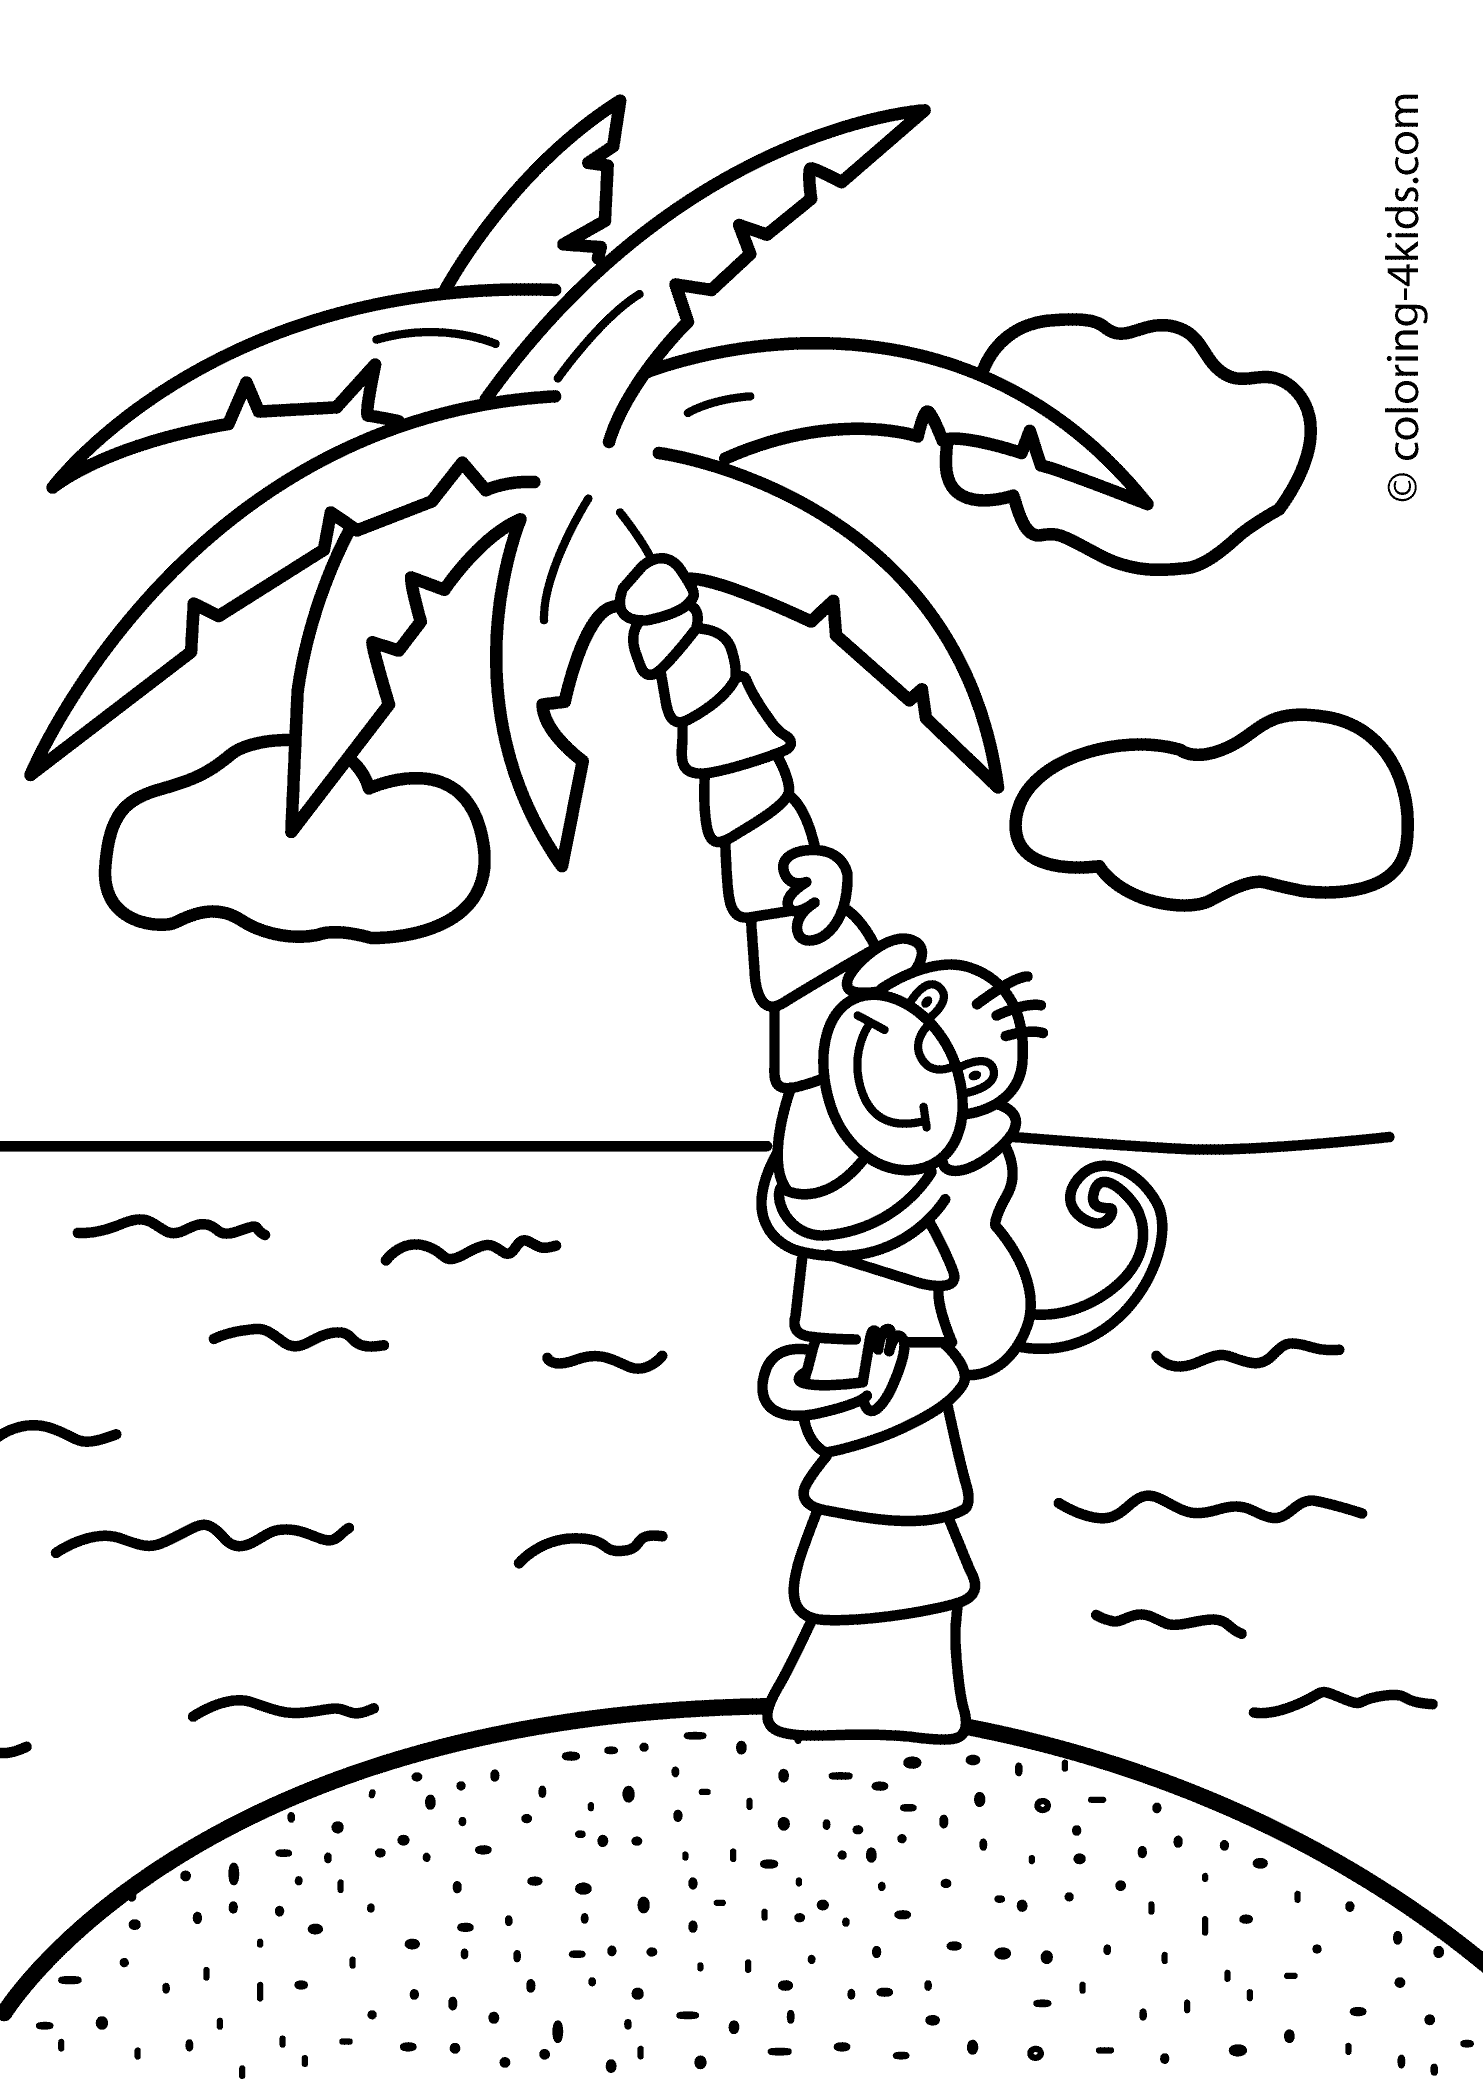 Candy Island Coloring Pages - Coloring Pages For All Ages